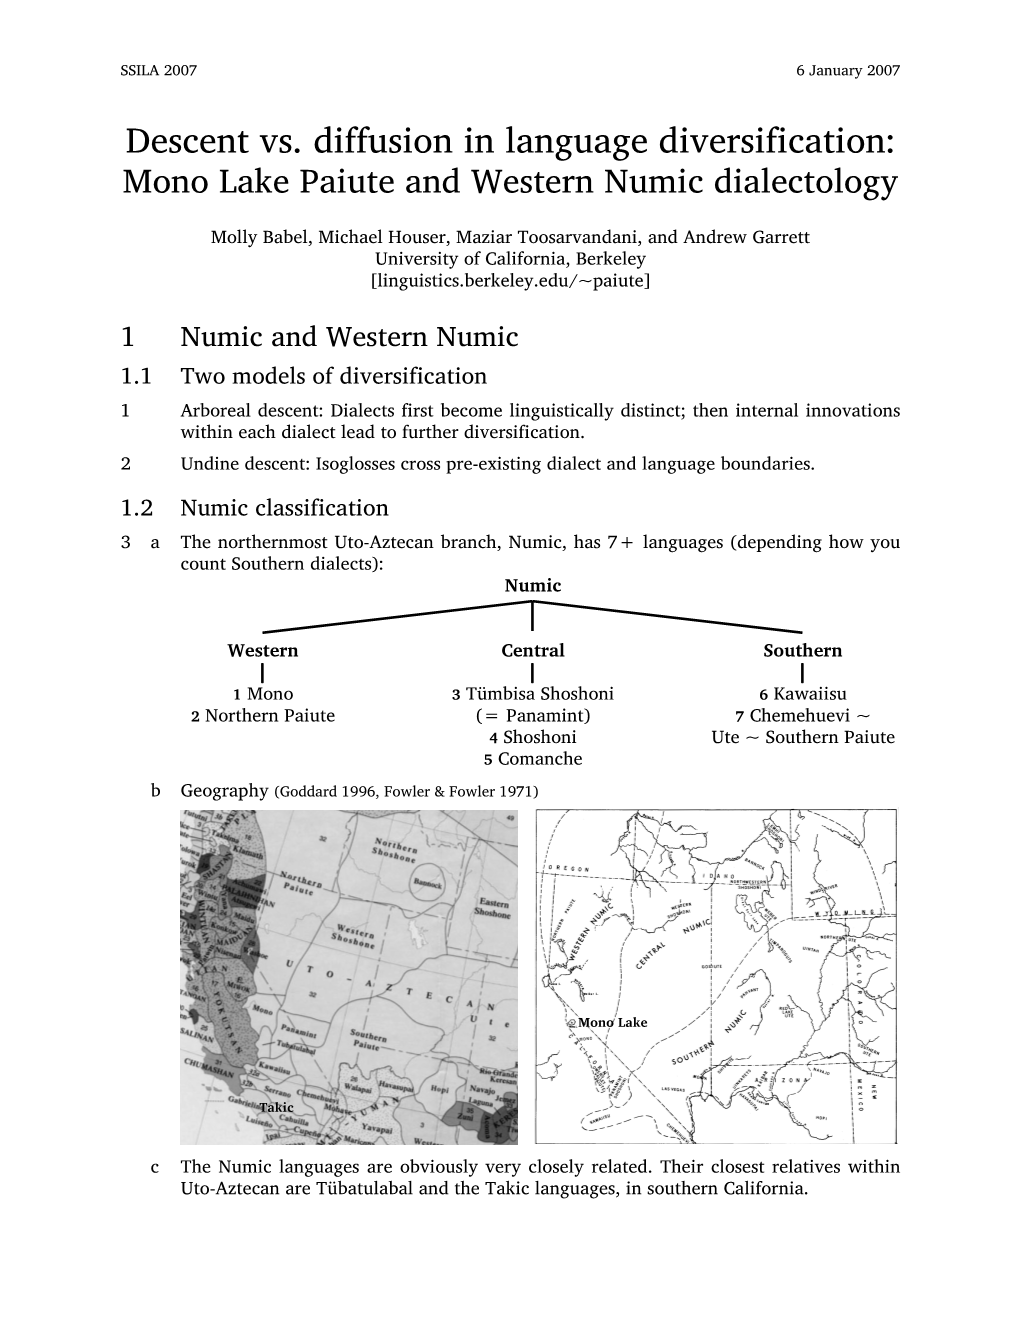 Descent Vs. Diffusion in Language Diversification: Mono Lake Paiute and Western Numic Dialectology